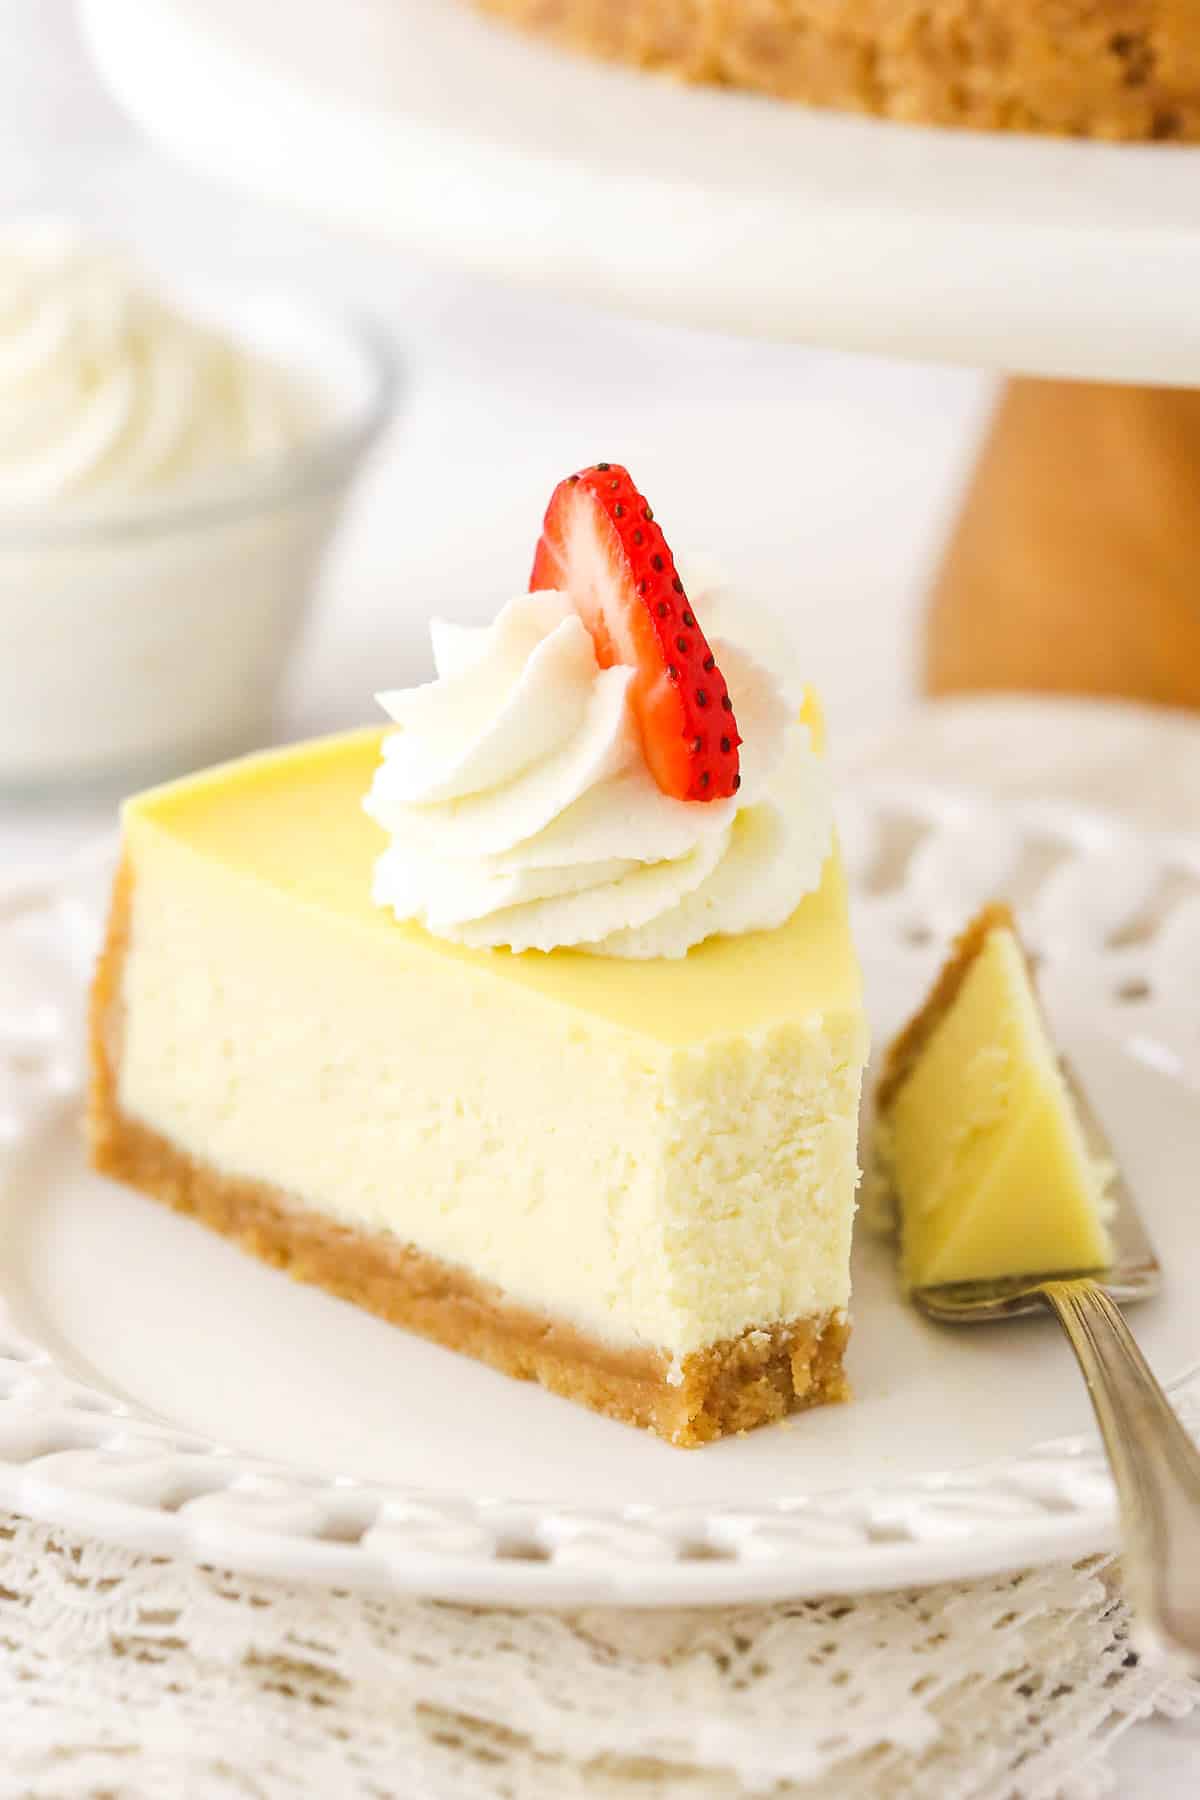 A slice of homemade cheese cake with whipped cream and strawberries, a bite taken out of the cheesecake with a fork next to it